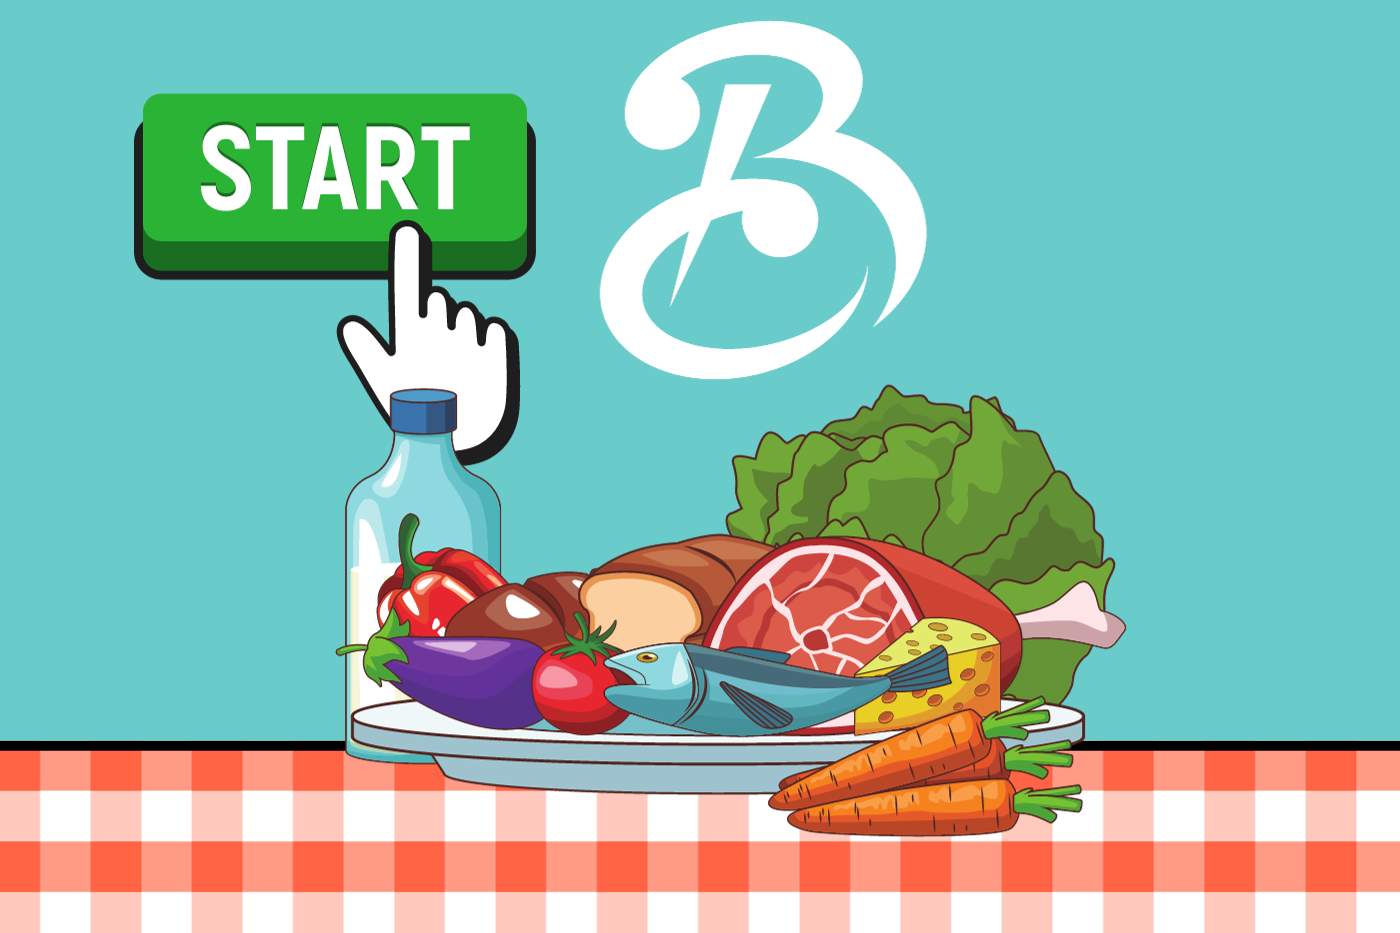 foods that start with b